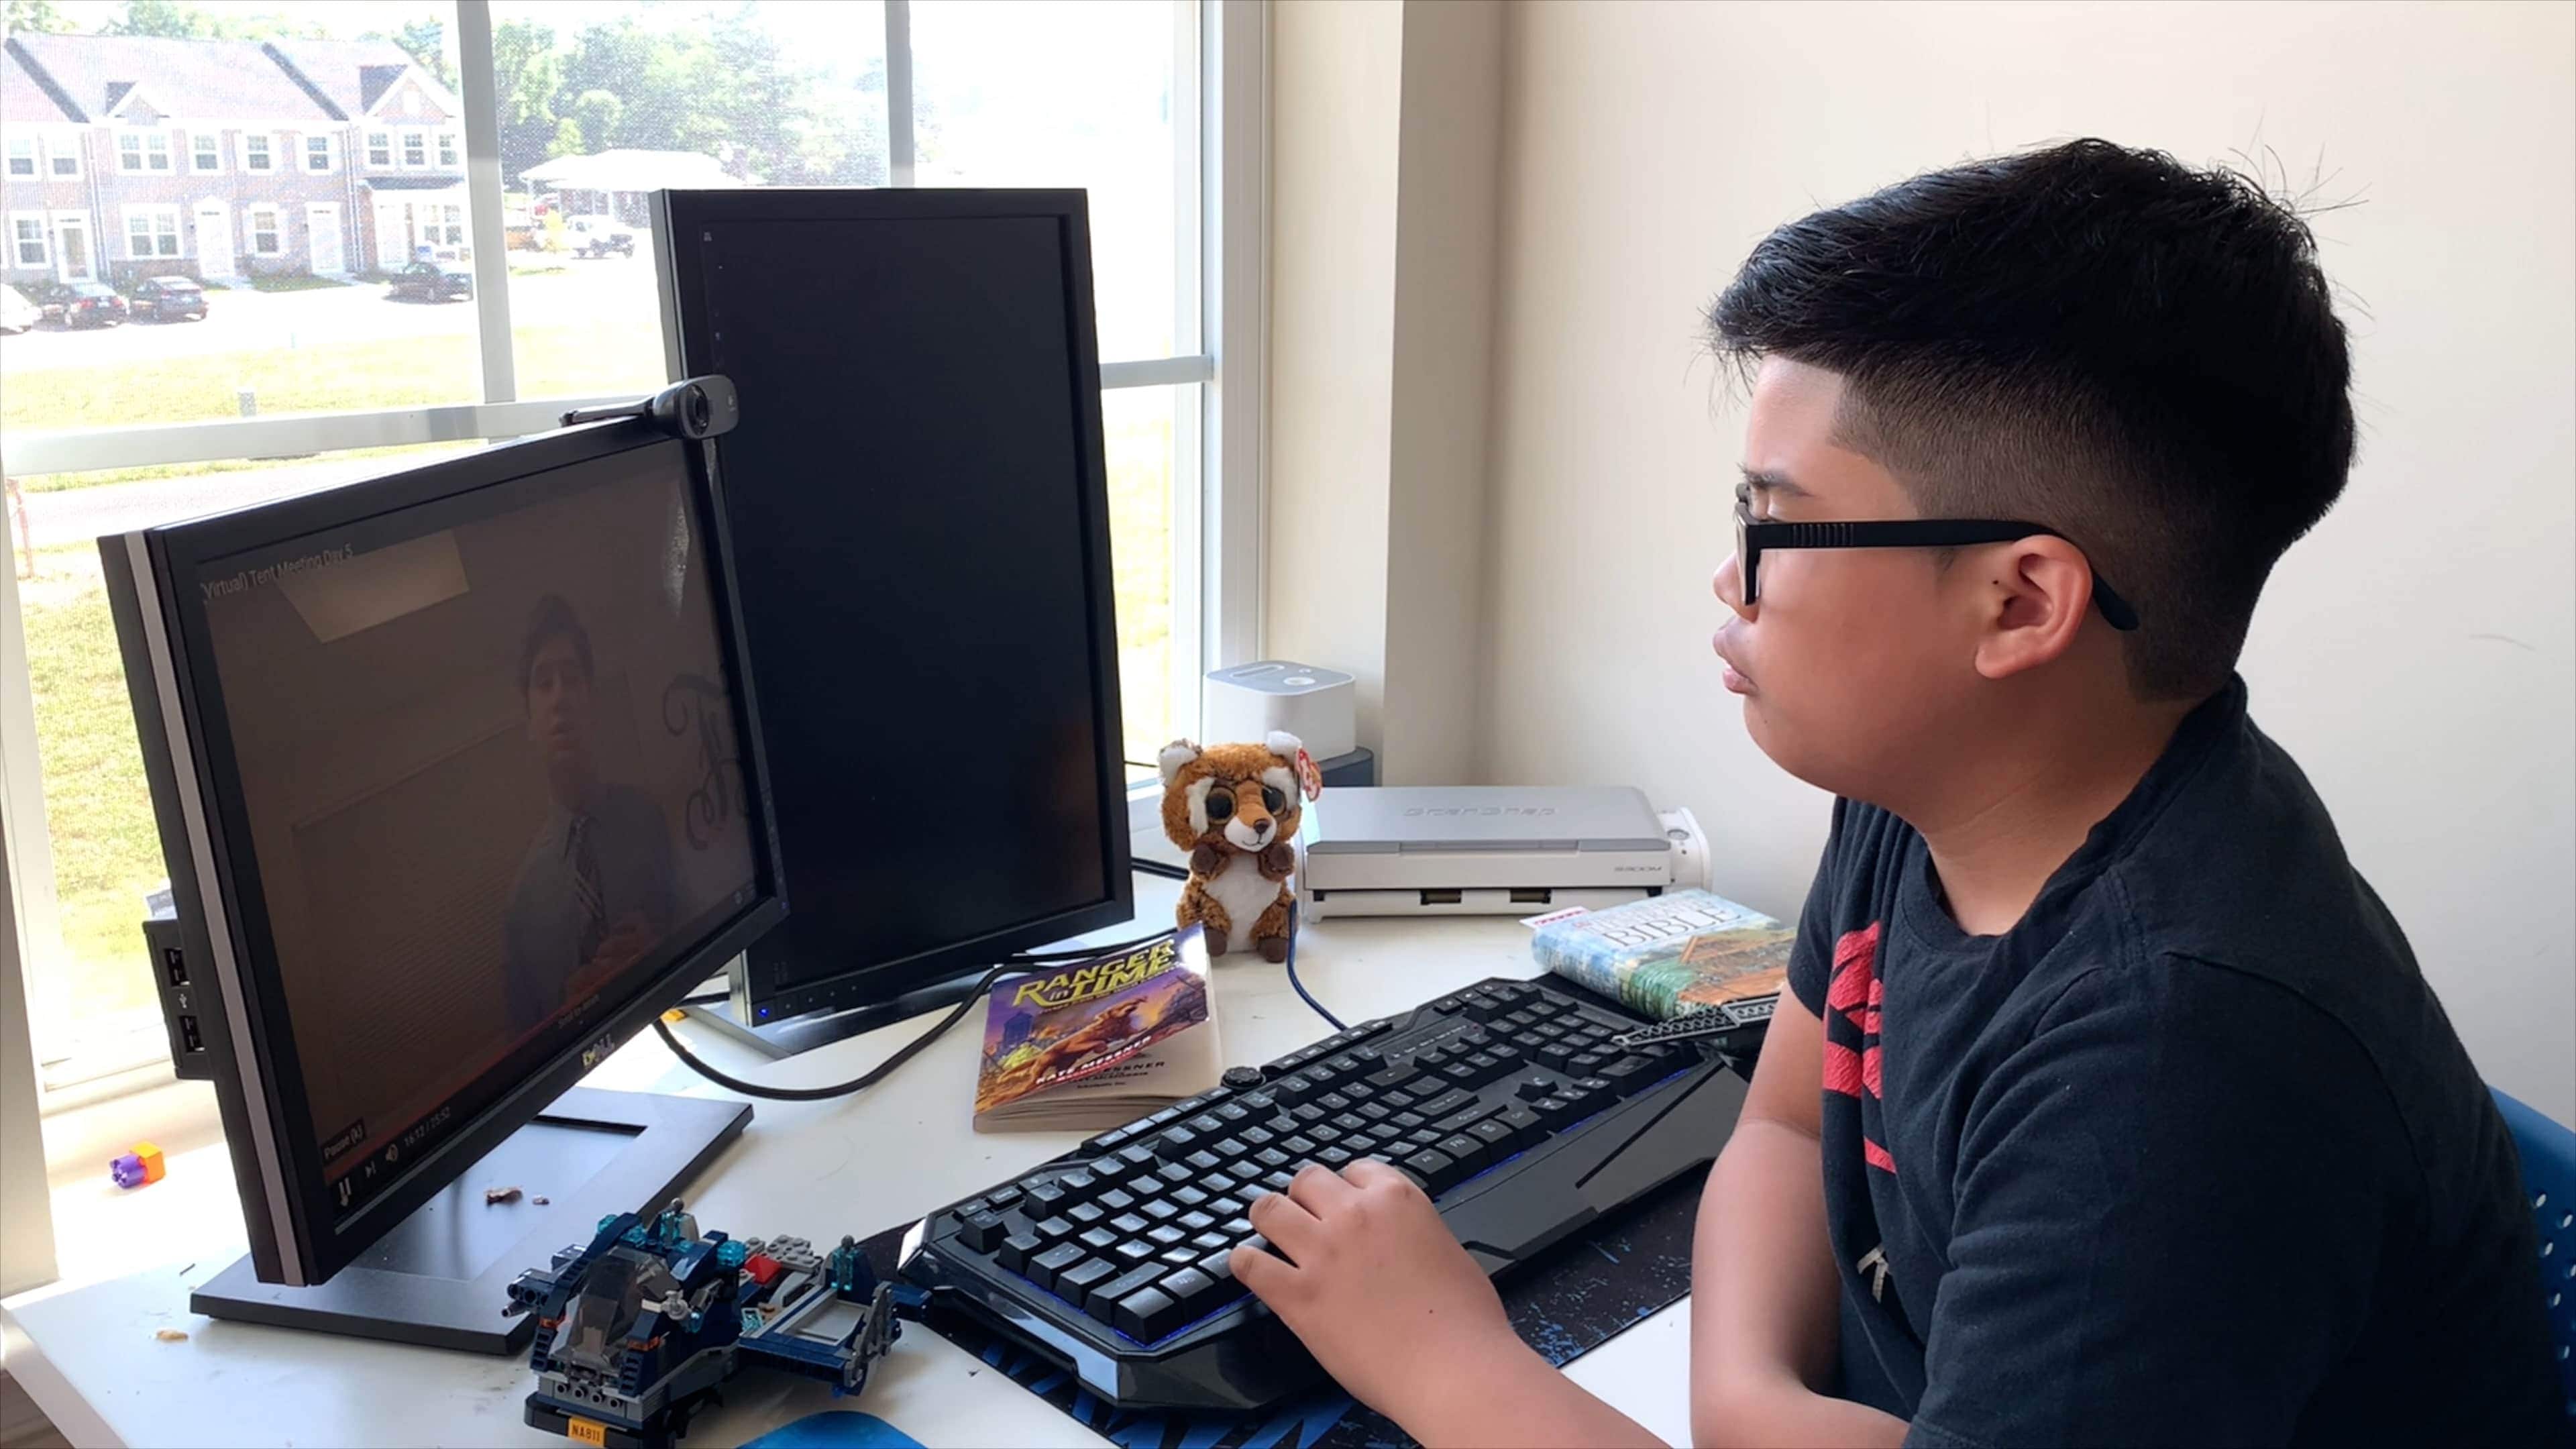 As “The Tent” evangelistic series led and run by Ruth Murdoch Elementary School students in Berrien Springs, Michigan, goes virtual, kids like this boy can watch online. [Photo: Mark B. Sigue, North American Division News]